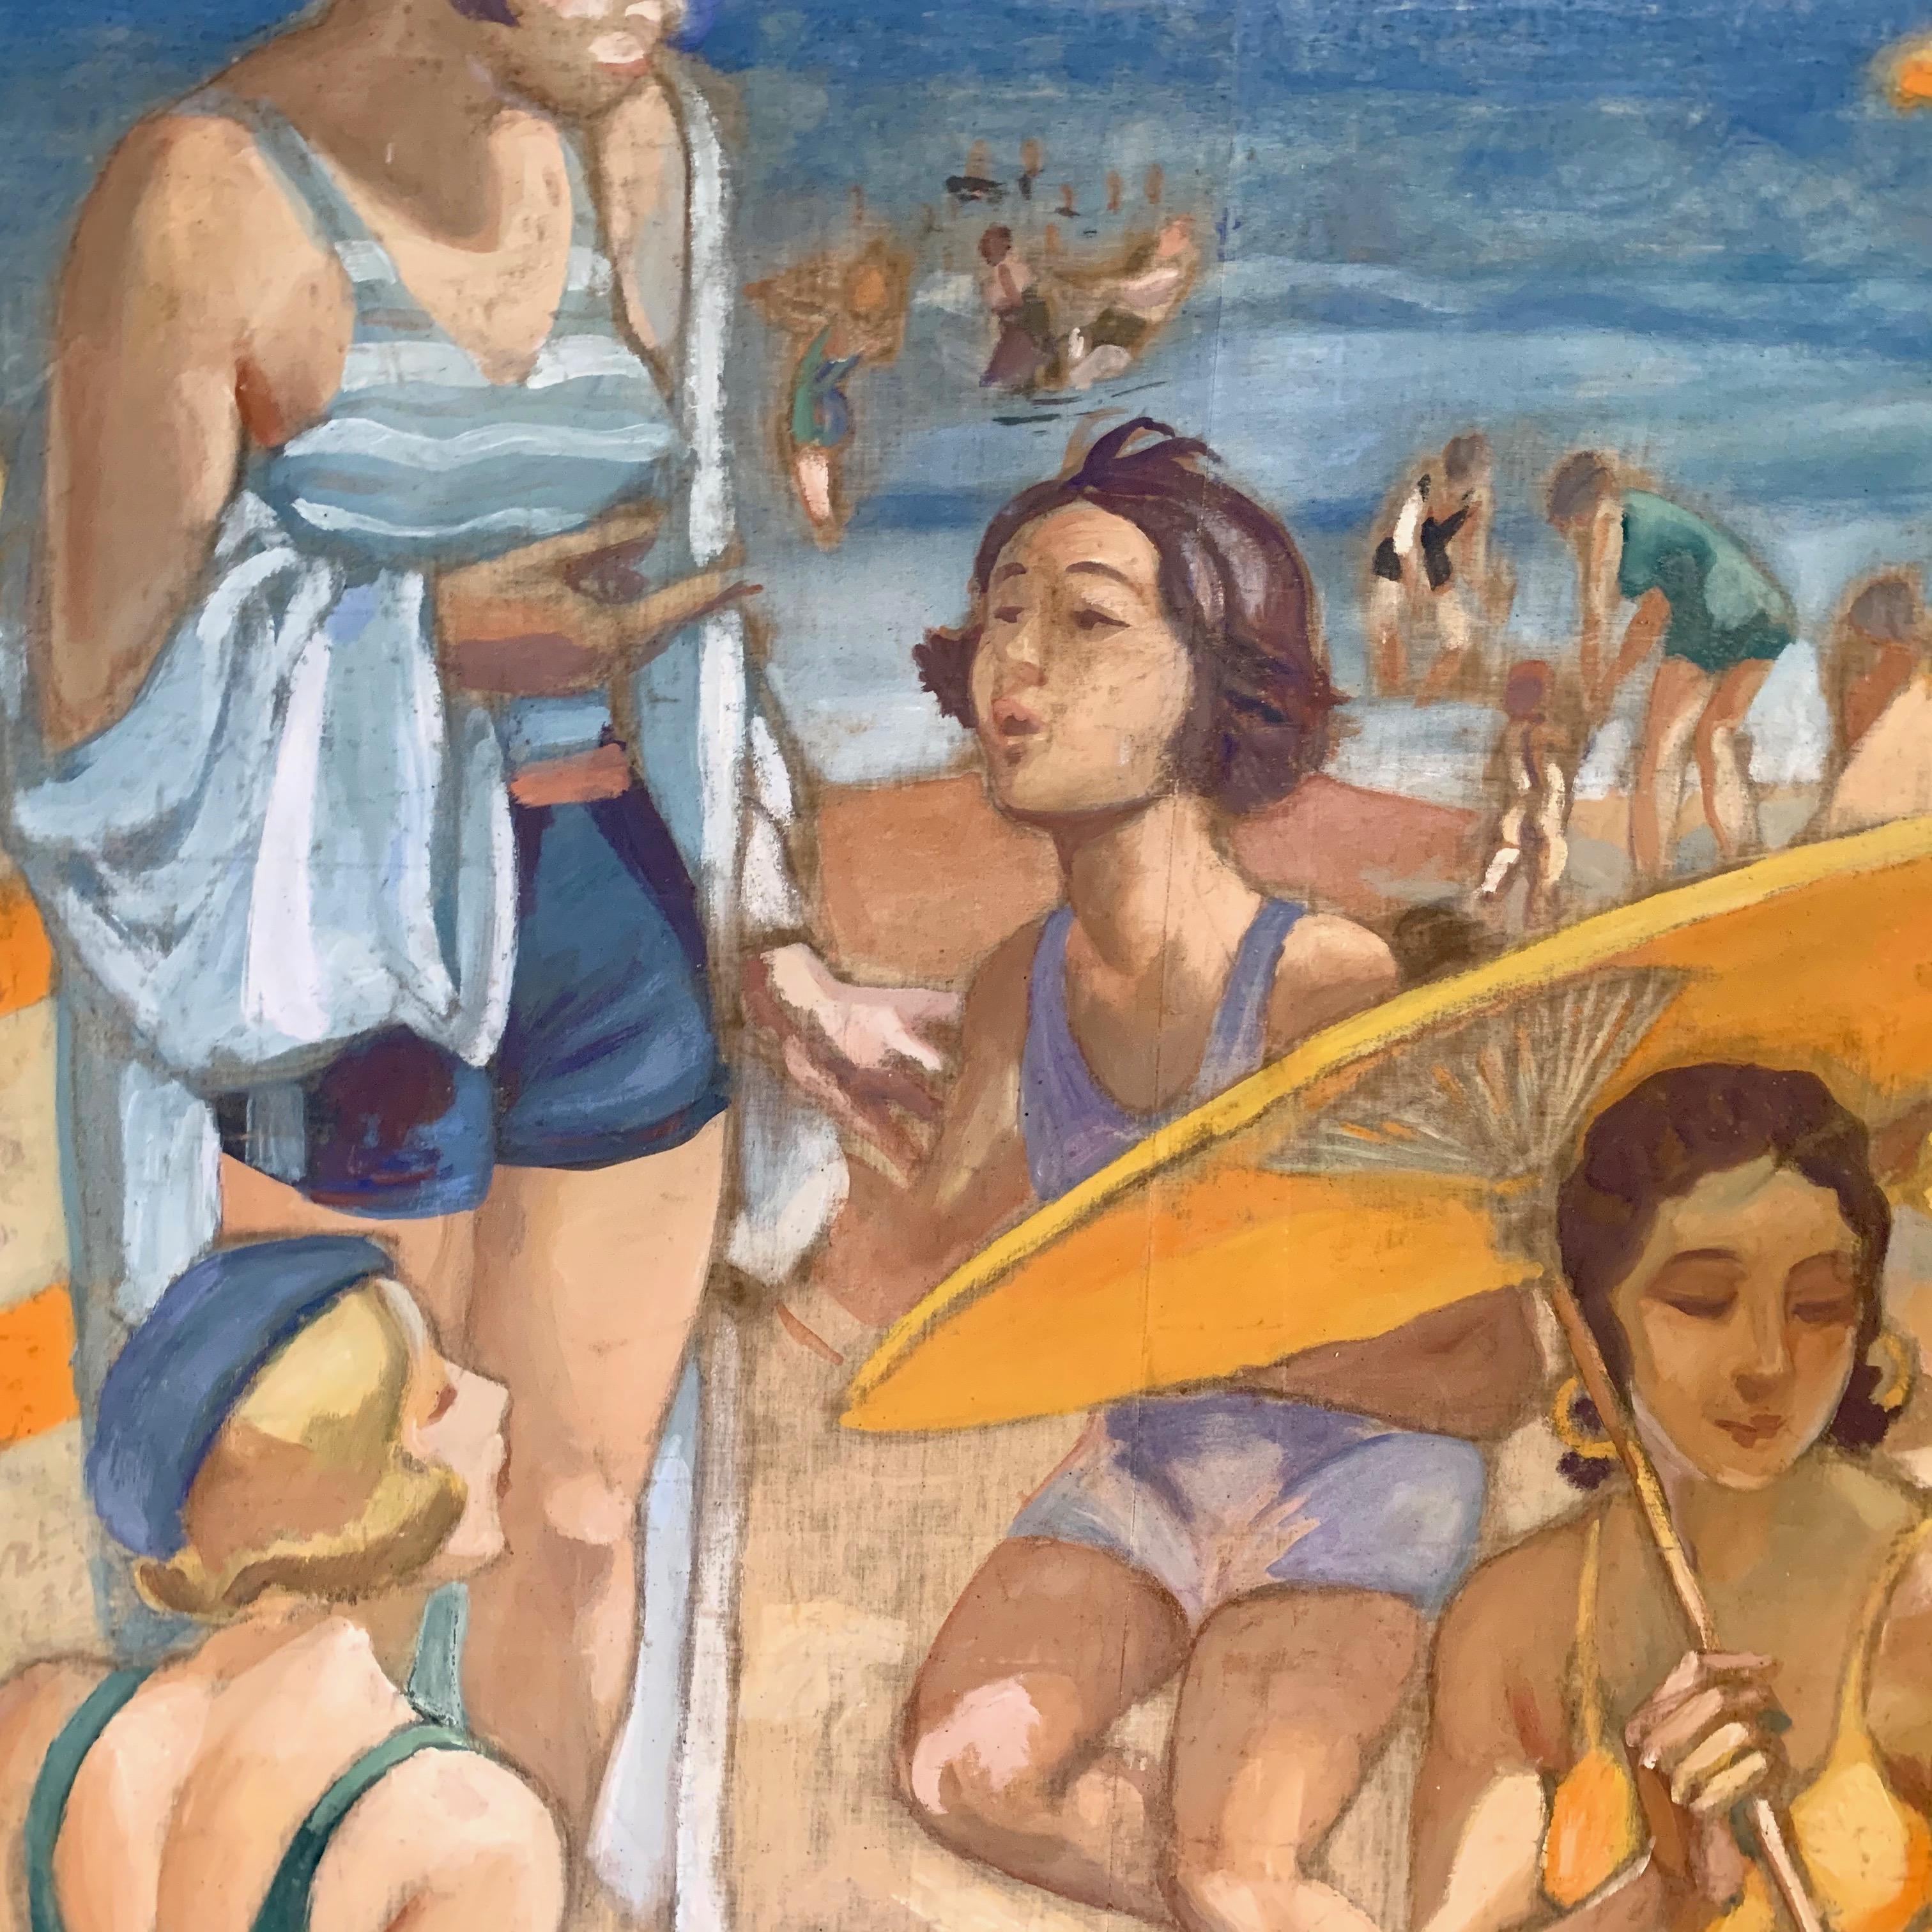 French Art Deco oil painting titled 'Day At The Beach' created by Henri Pedezert in circa 1930. The piece depicts a group of beach-goers in colorful bathing suits and beach wear of the period, lounging in the sun. 
Pedezert was active in the